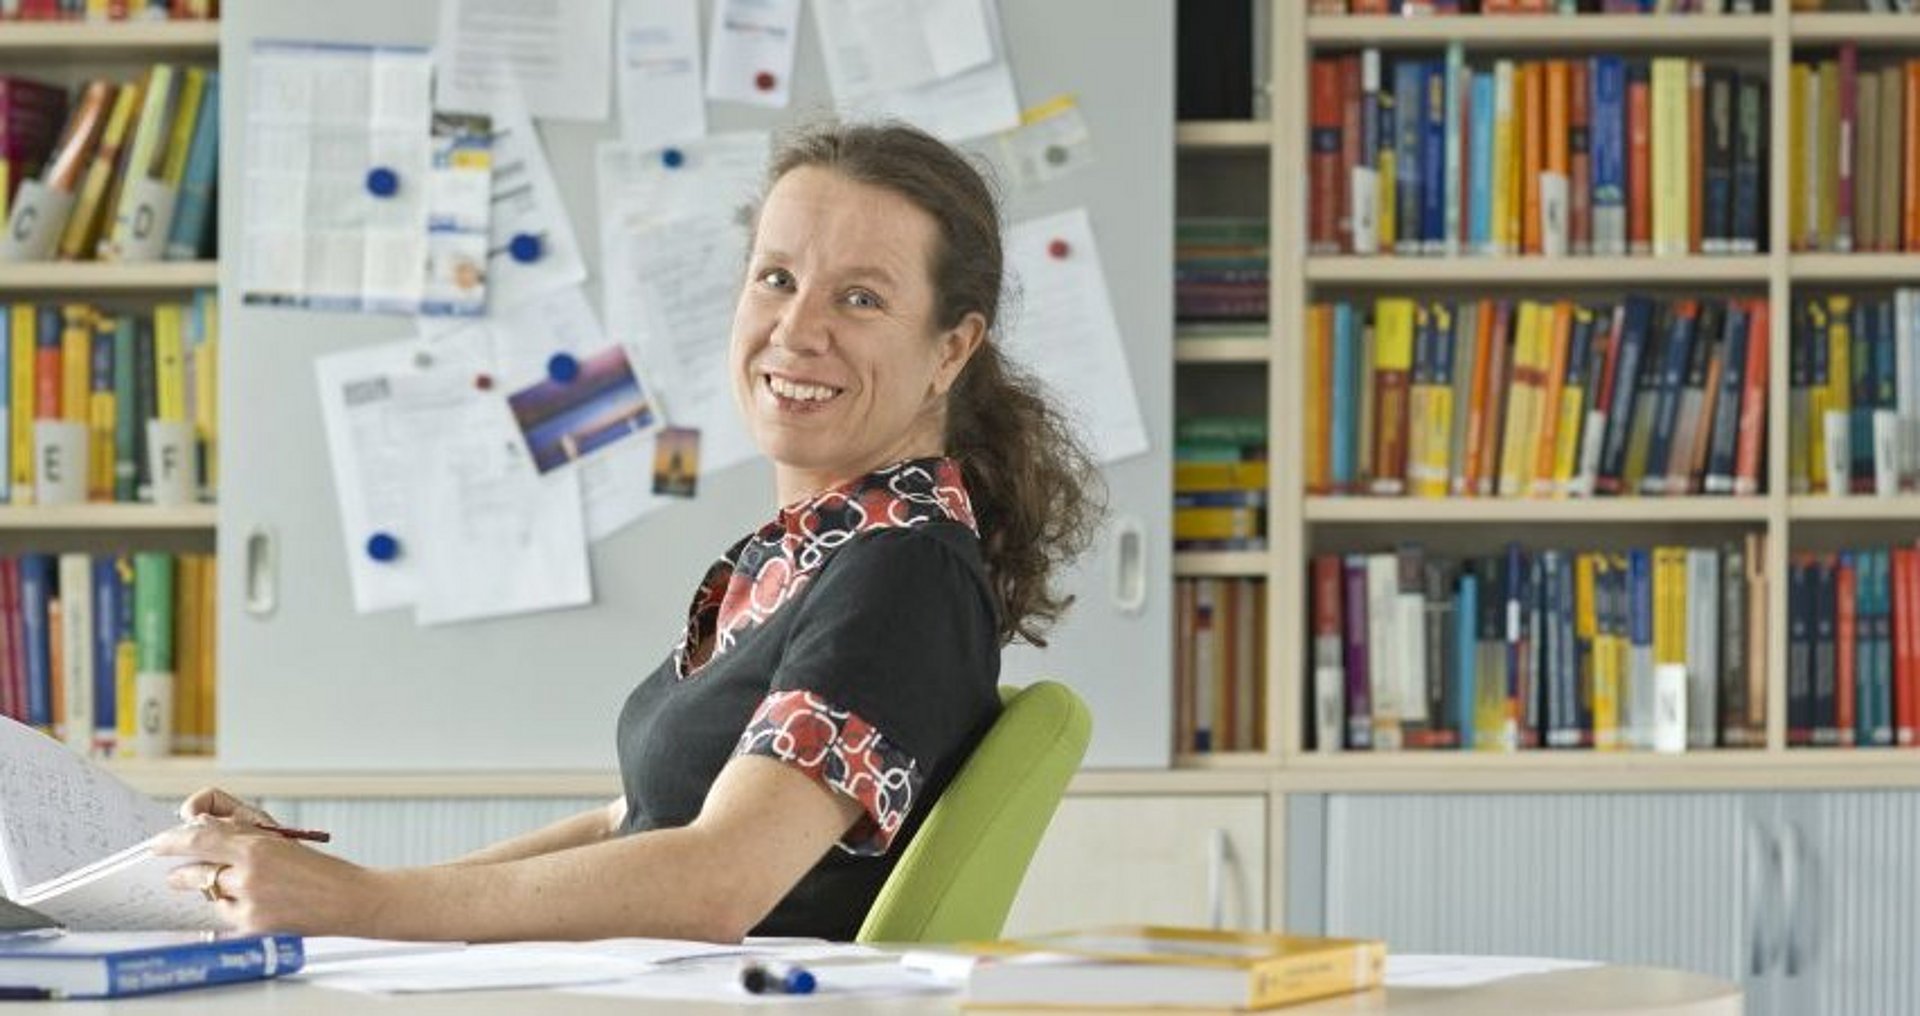 Prof. Barbara Wohlmuth received the Leibniz Prize in 2012 for her research in the field of domain decomposition methods.